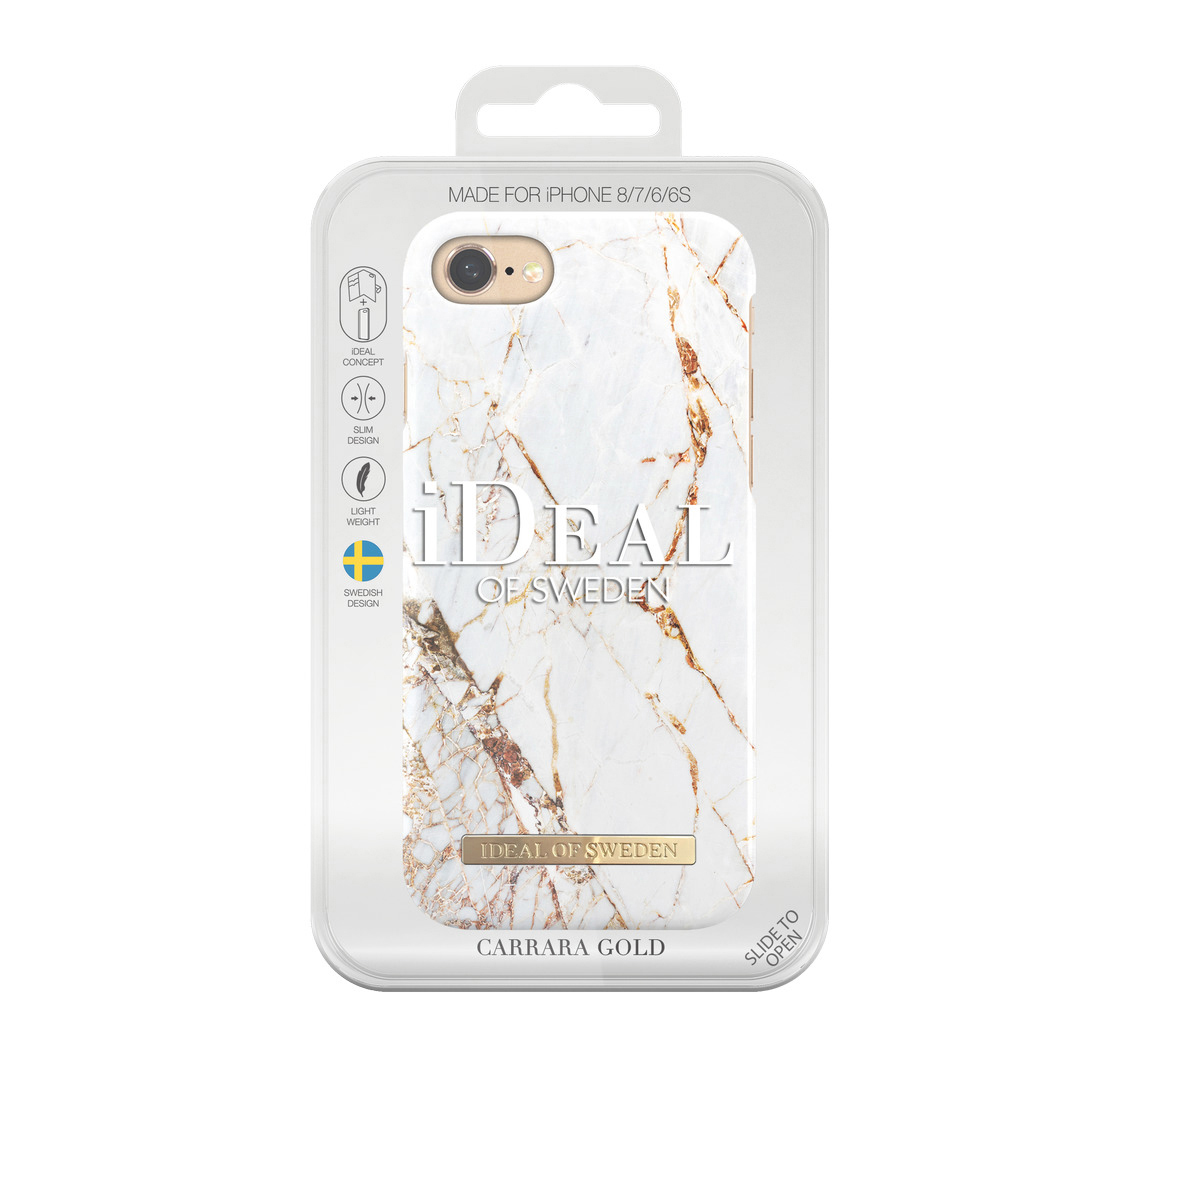 iPhone iPhone Carrara iPhone Fashion, Backcover, 7, Apple, 6, SWEDEN OF IDEAL Gold 8,